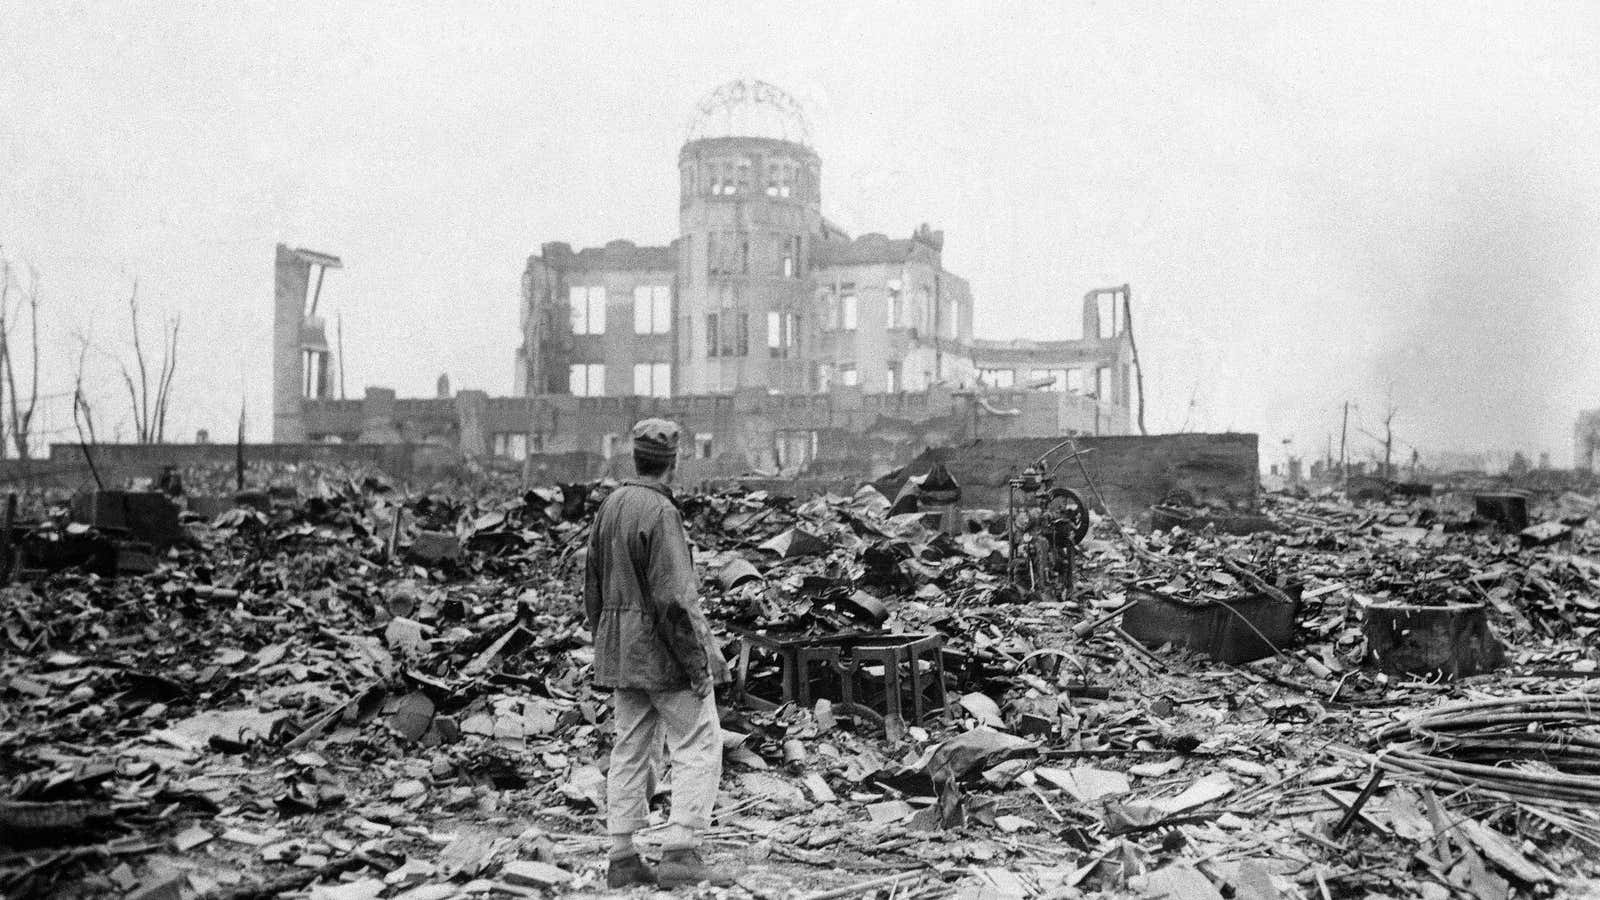 Hiroshima, one month after the atomic bomb.